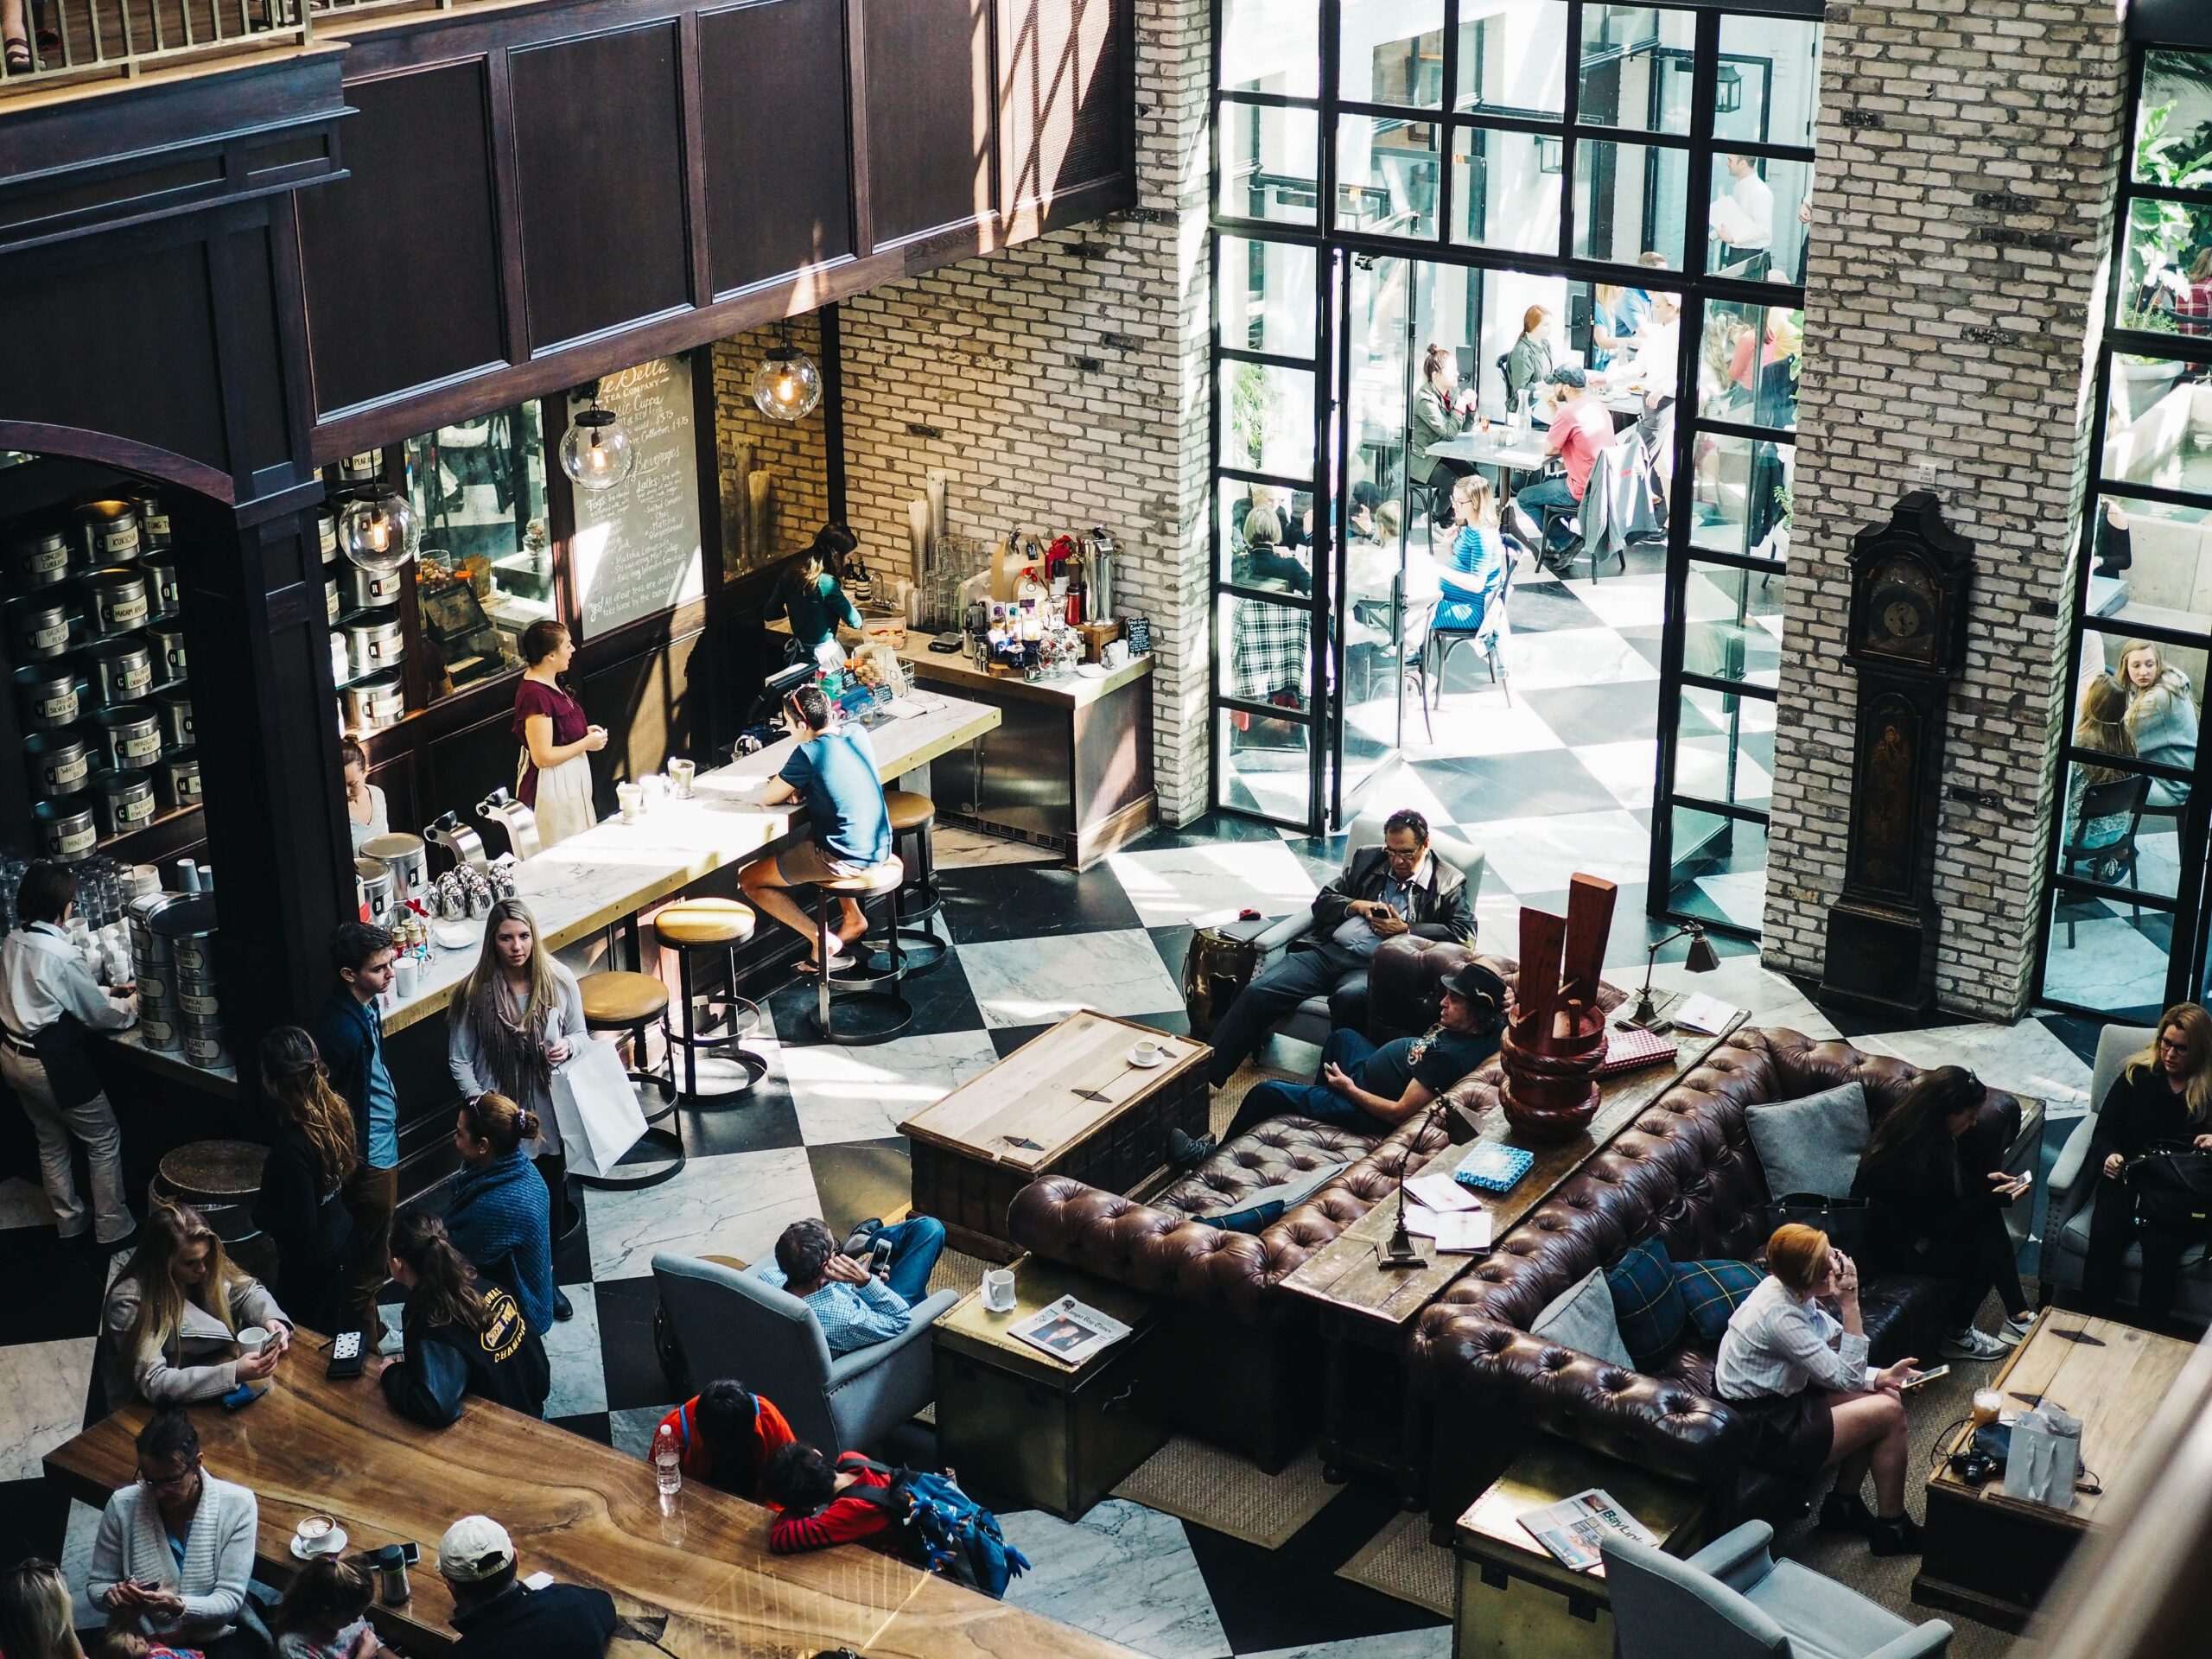 How to Attract and Keep More Residents in Your Coworking Space